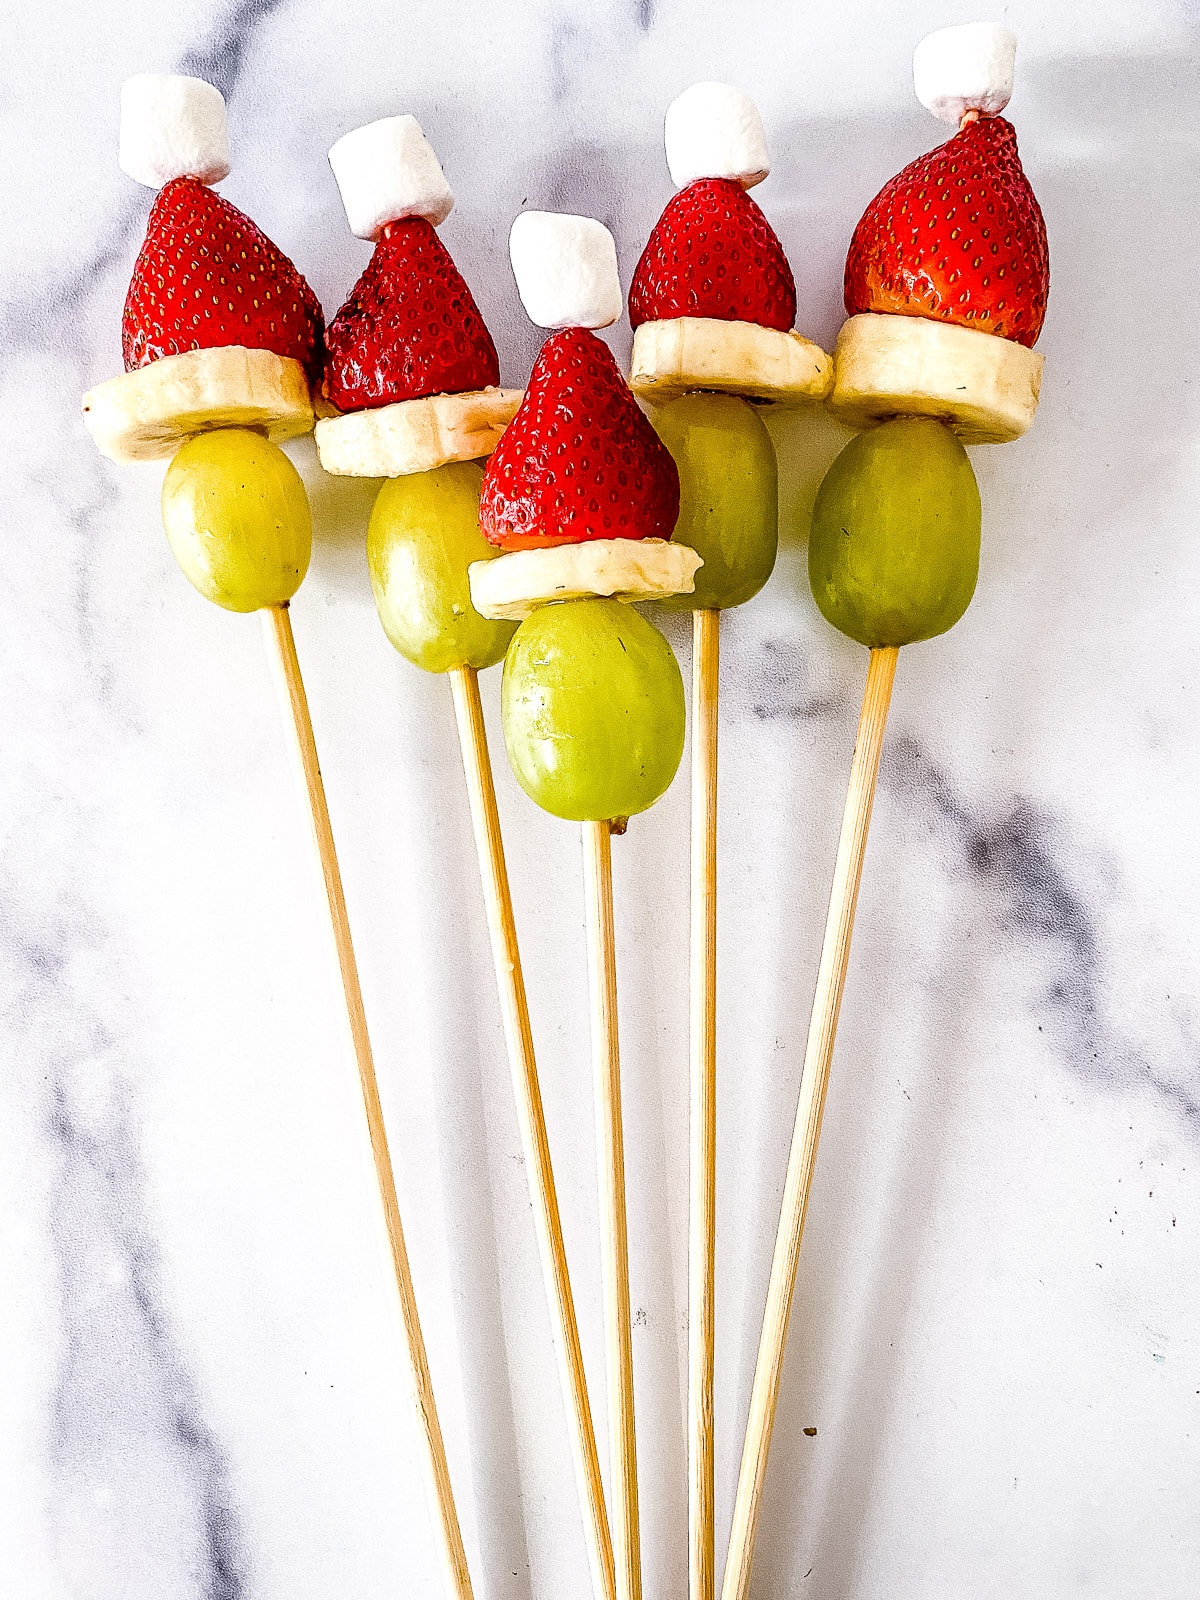 Skewers threaded with grapes, bananas, strawberries and marshmallows